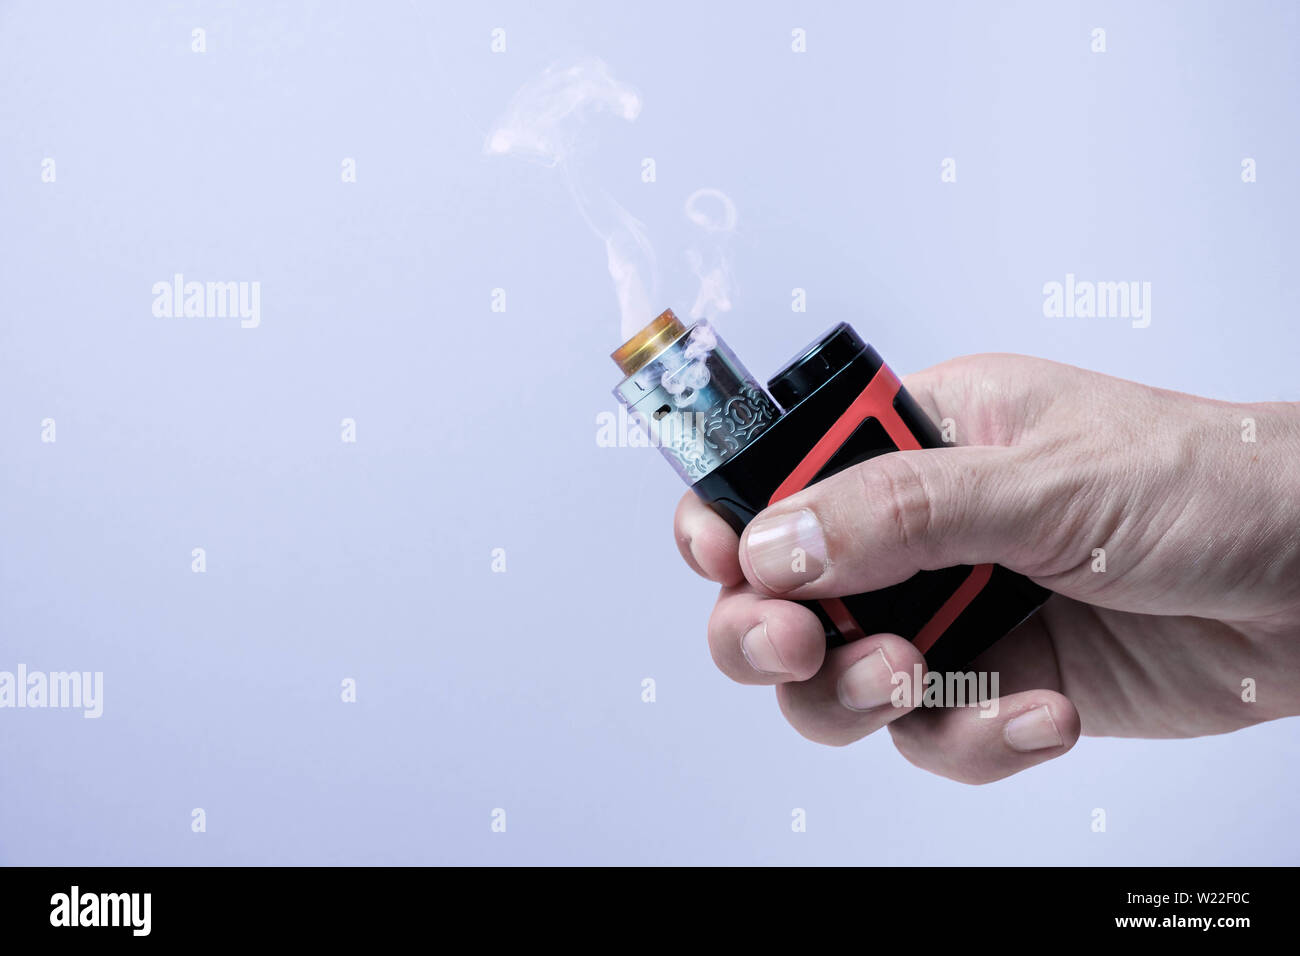 Vape mod e-cig for help quit smoking tobacco with atomizer rdta holding in hand Stock Photo